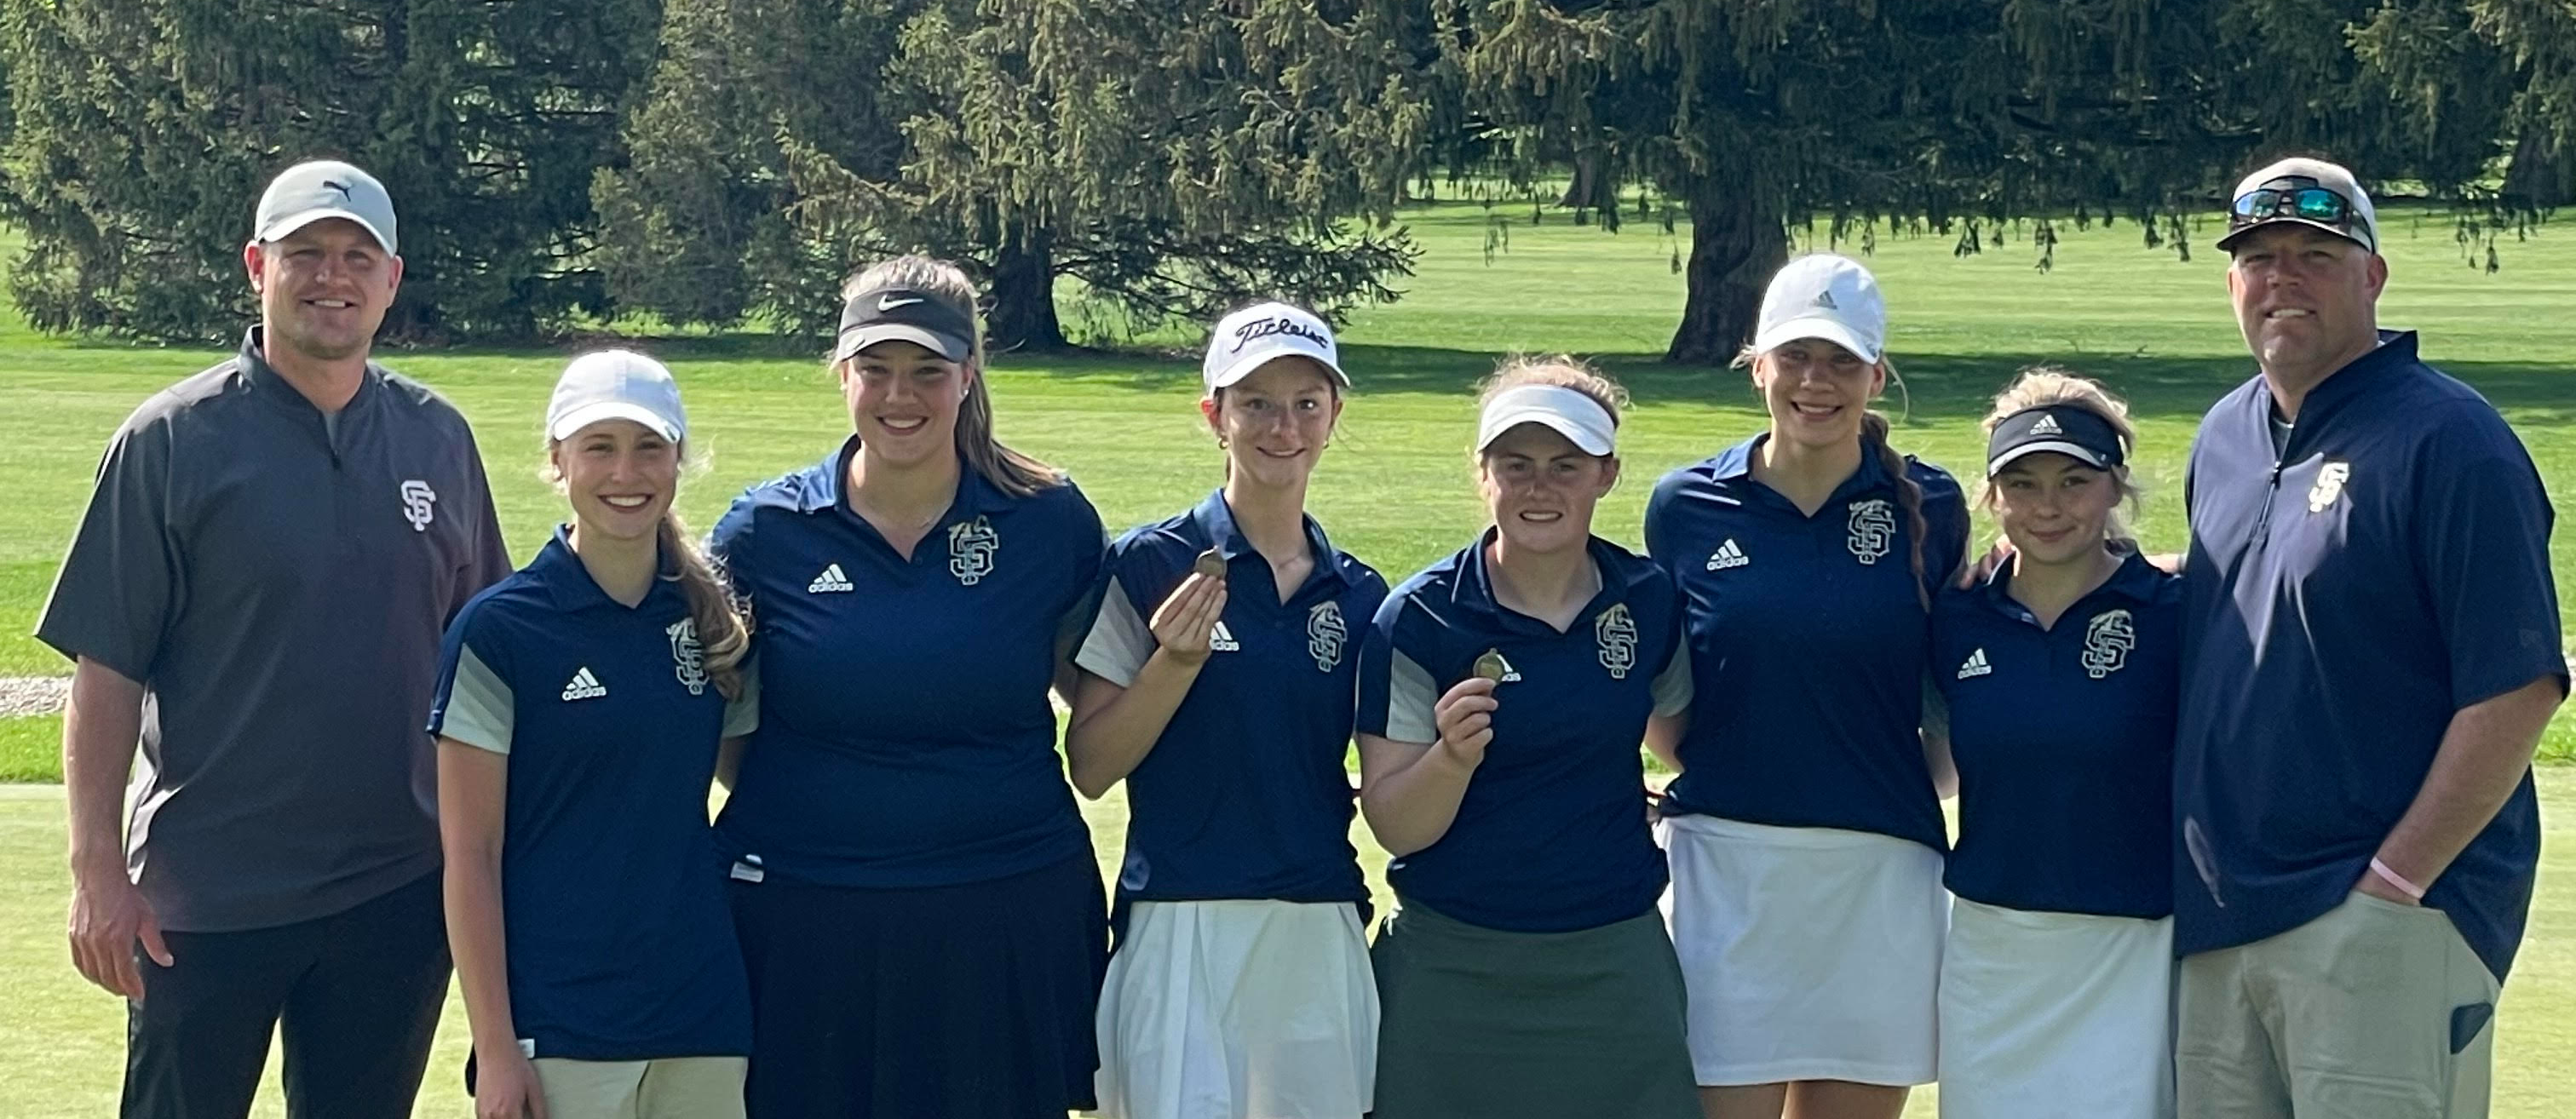 S-F Golf Team - Conference Meet